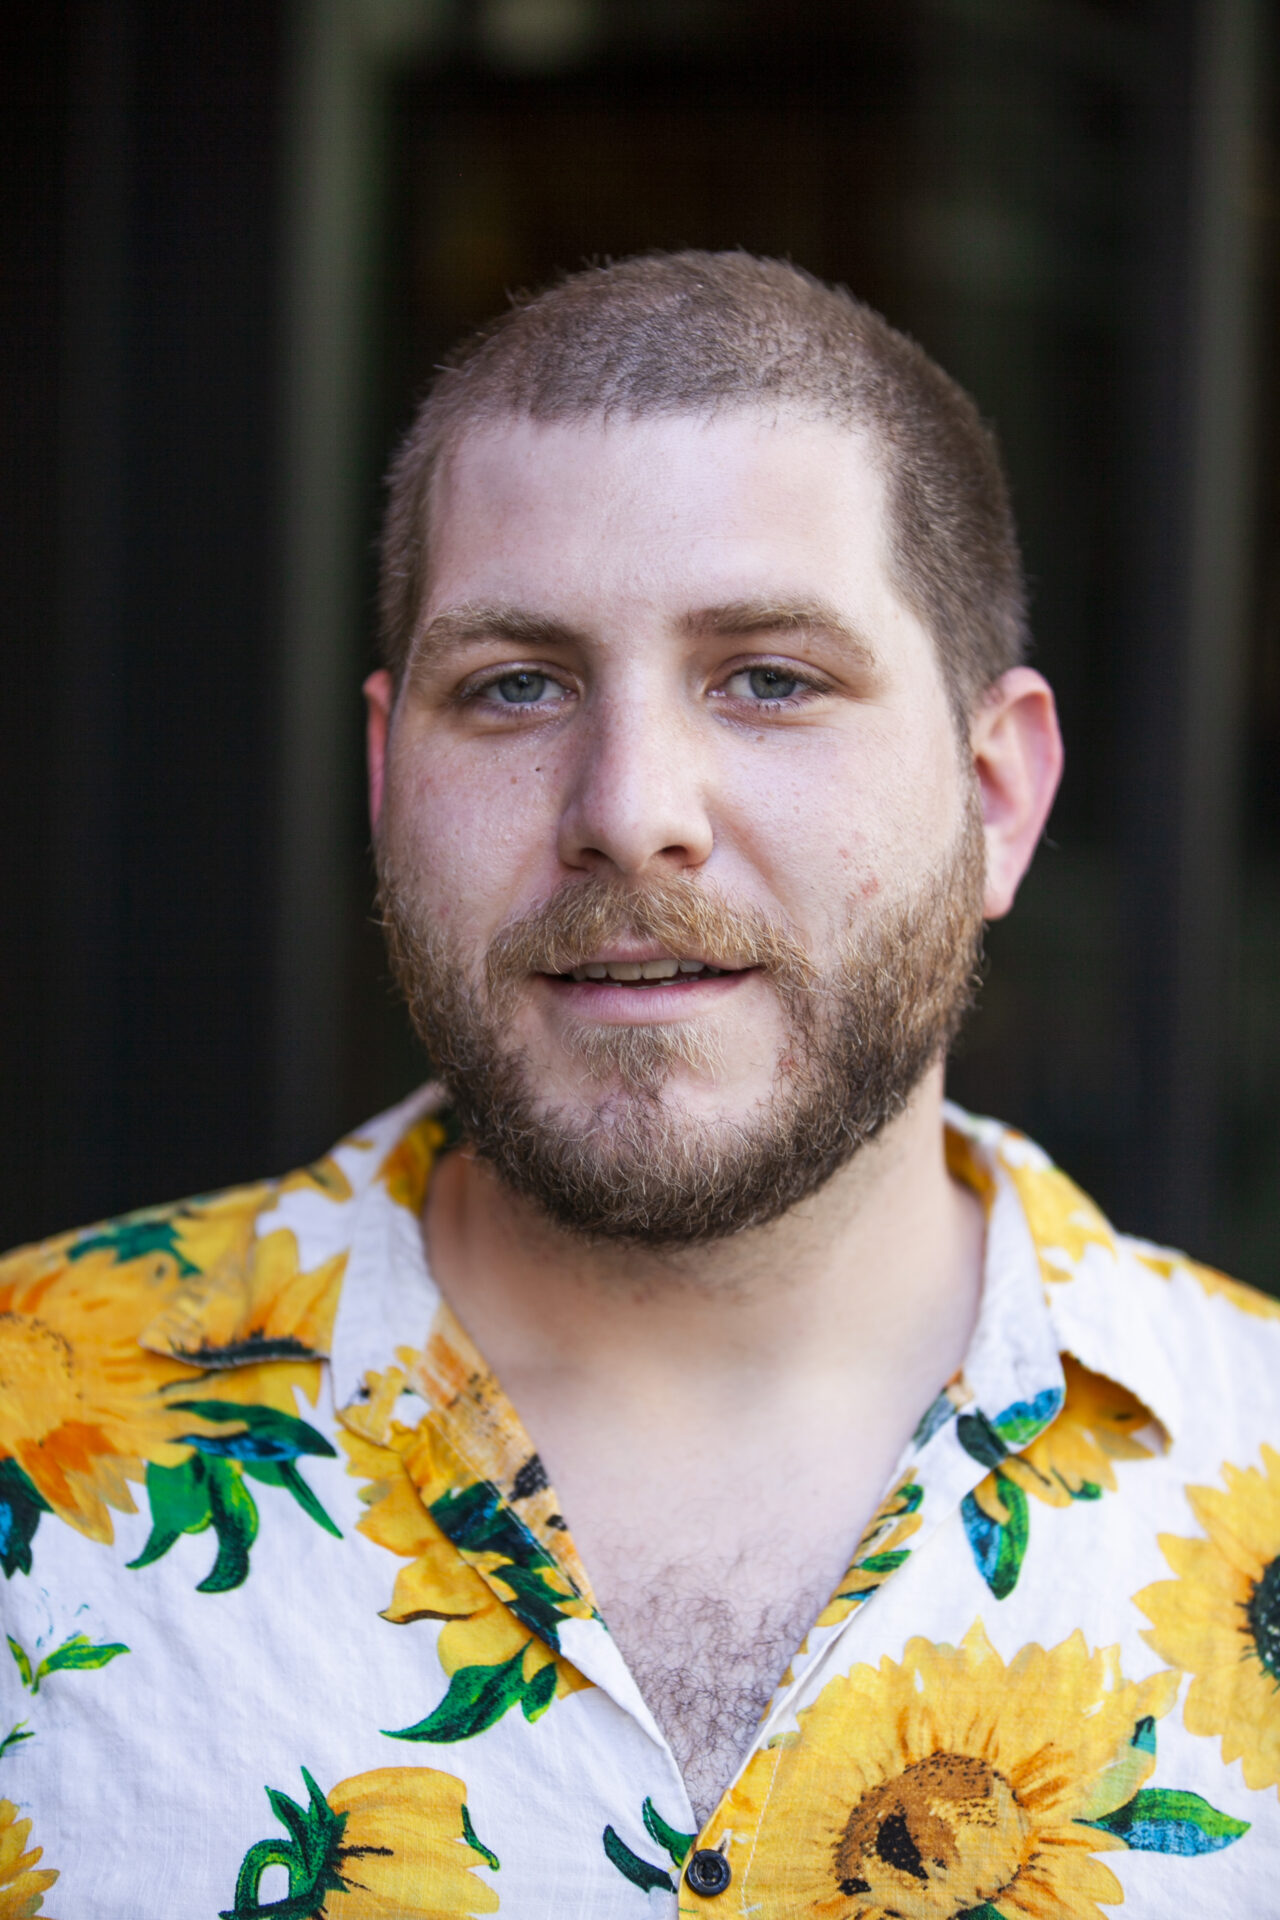 Pictured is artist Roo, a fair skin white-passing indigenous person with buzzed hair, trimmed moustache, beard. Roo wears a button up shirt with patterns of bright yellow flowers.